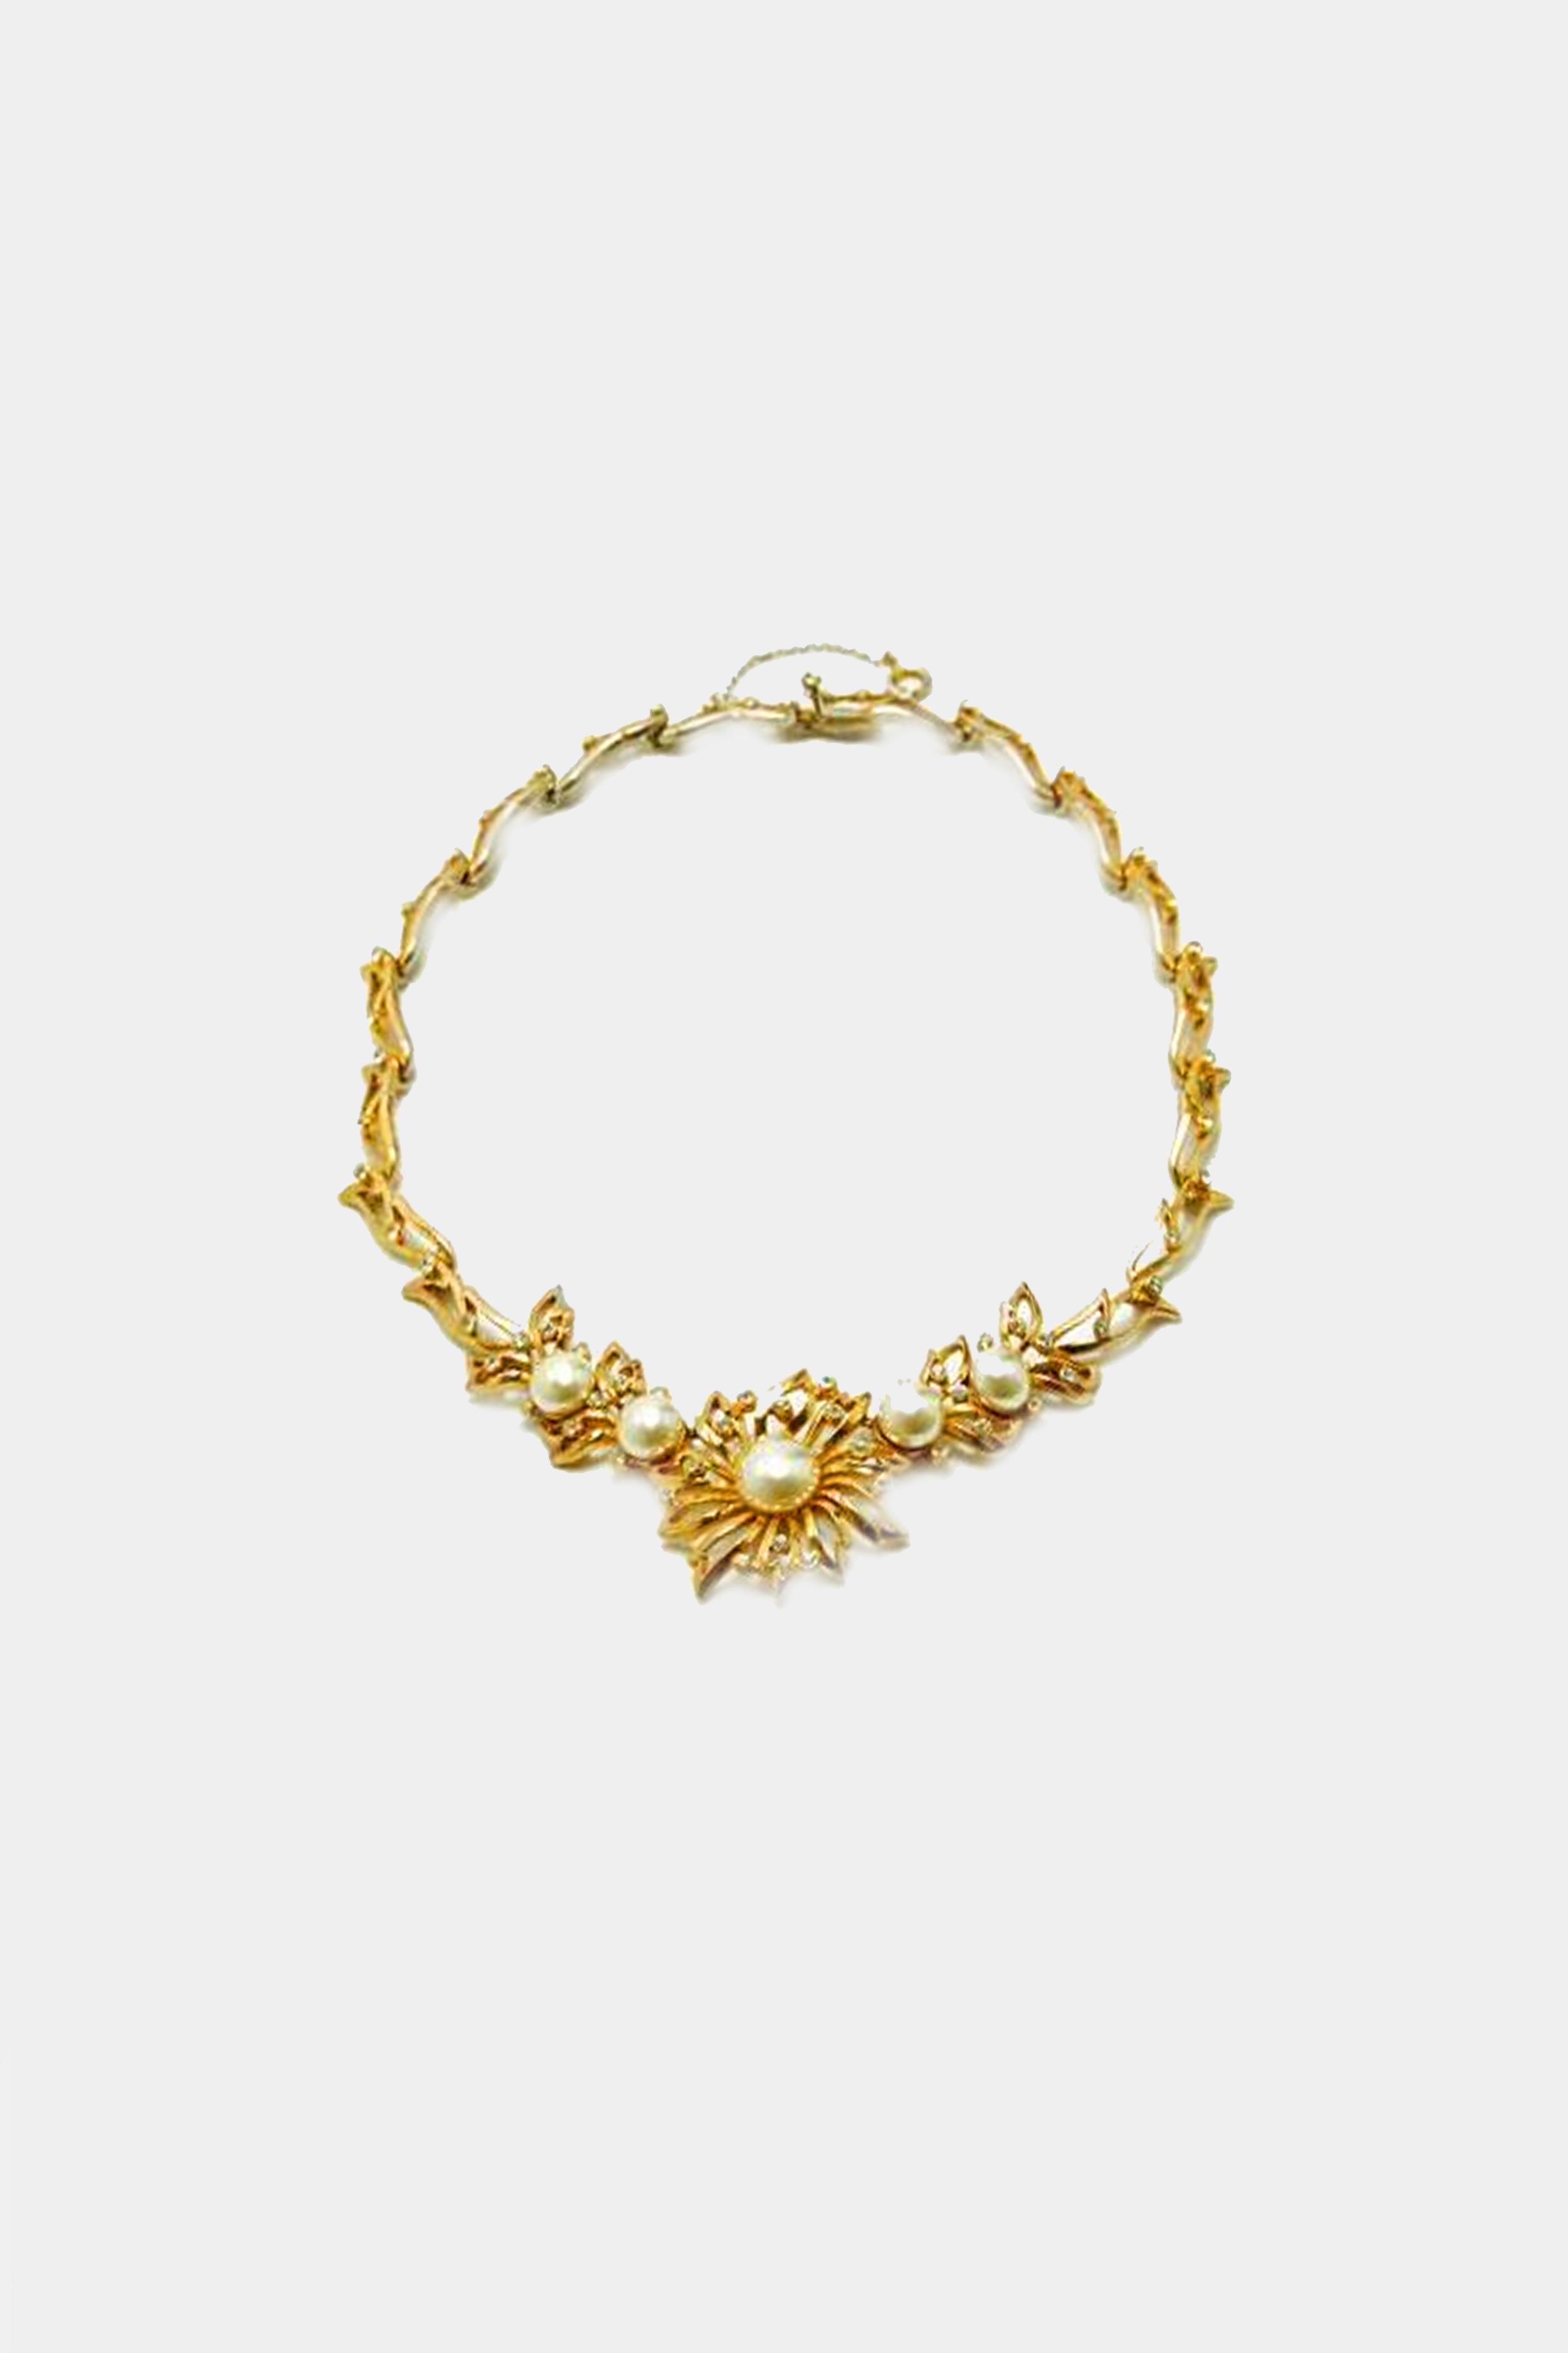 Christian Dior 1950s Gold Floral Pearl Necklace